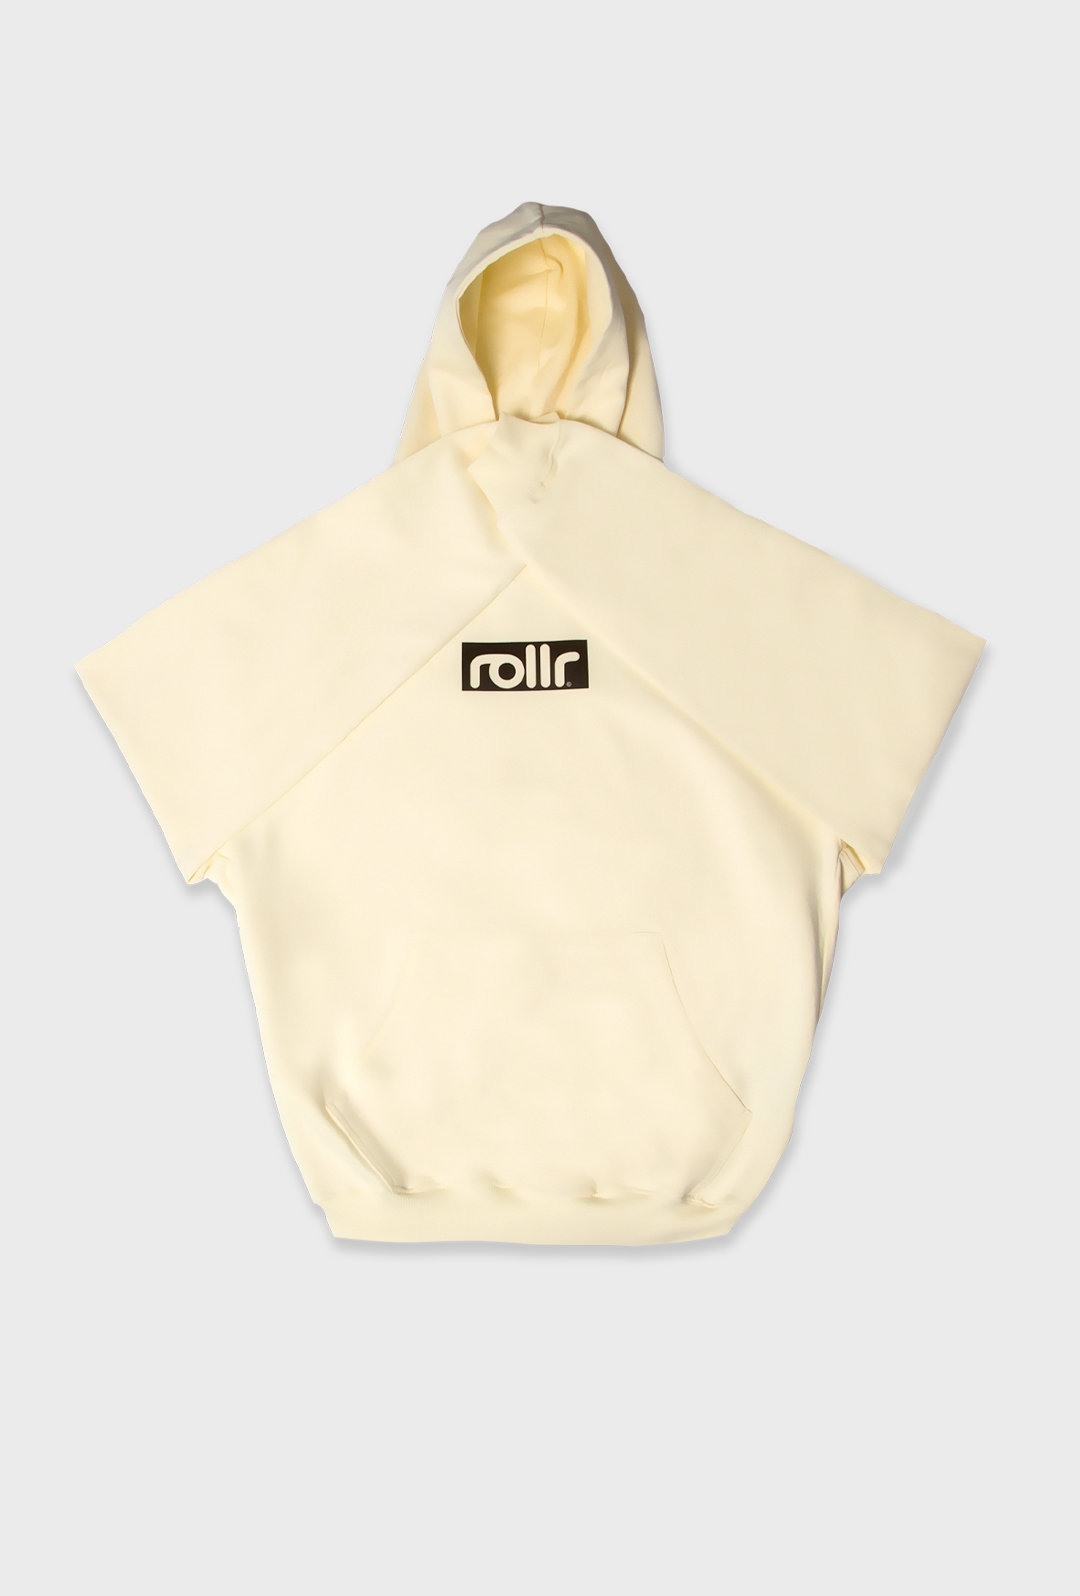 mens heavyweight vanilla cream box fit hoodie made from french terry fabric and rollr logo print and black label with rollr logo